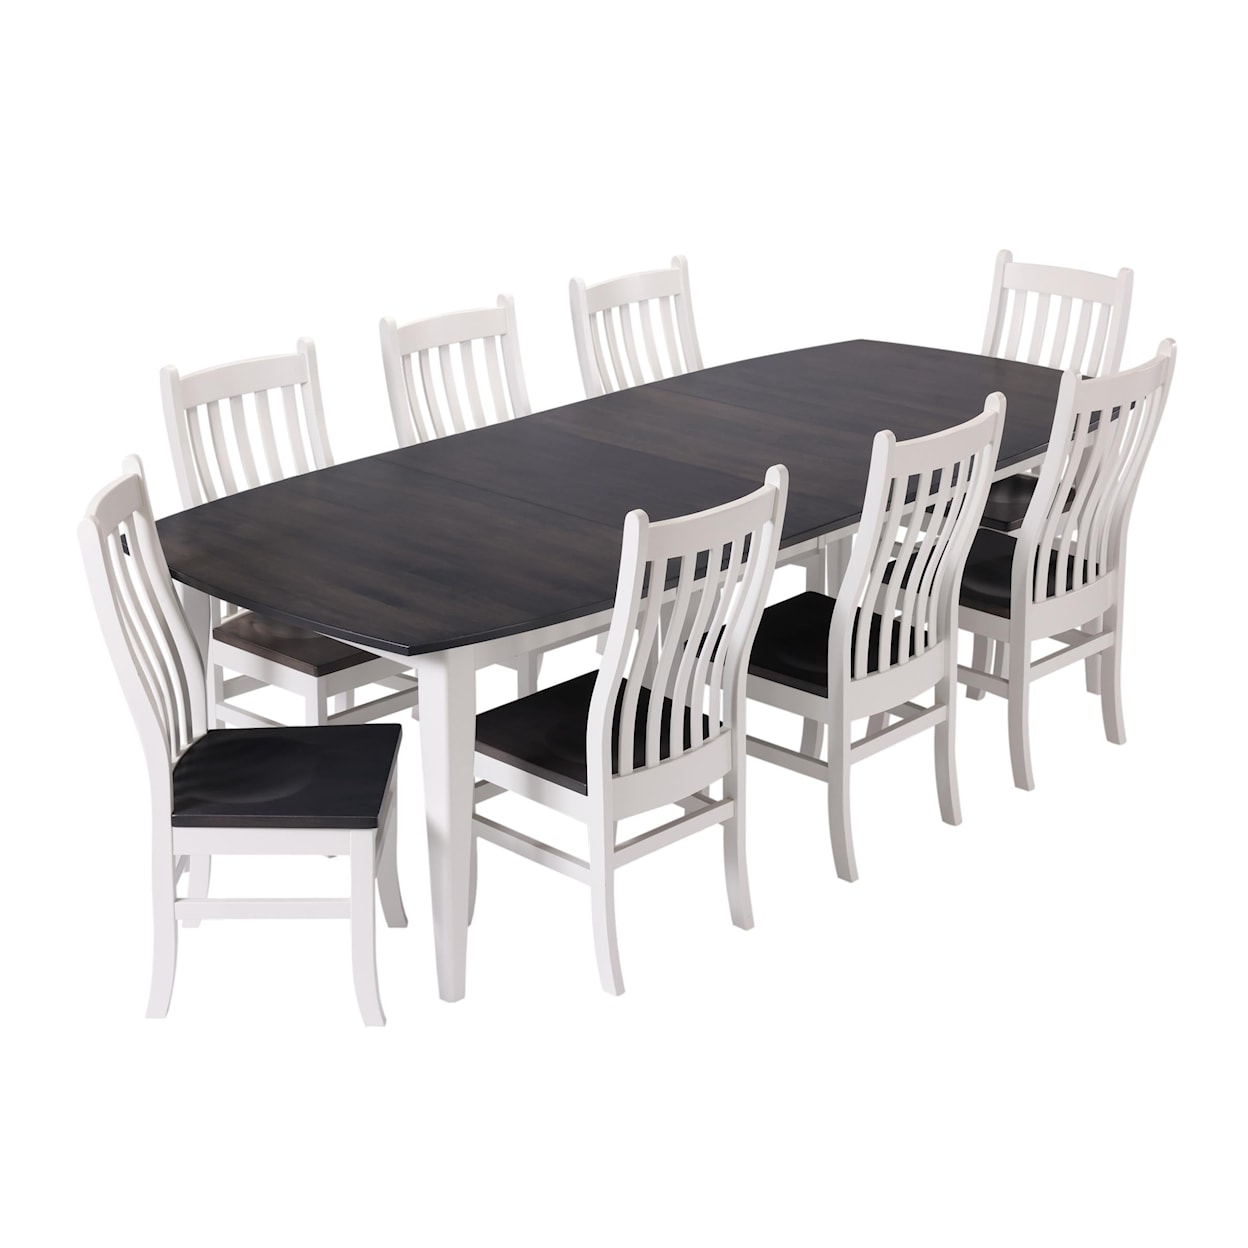 L.J. Gascho Furniture Maiden 9 Piece Casual Dining Set